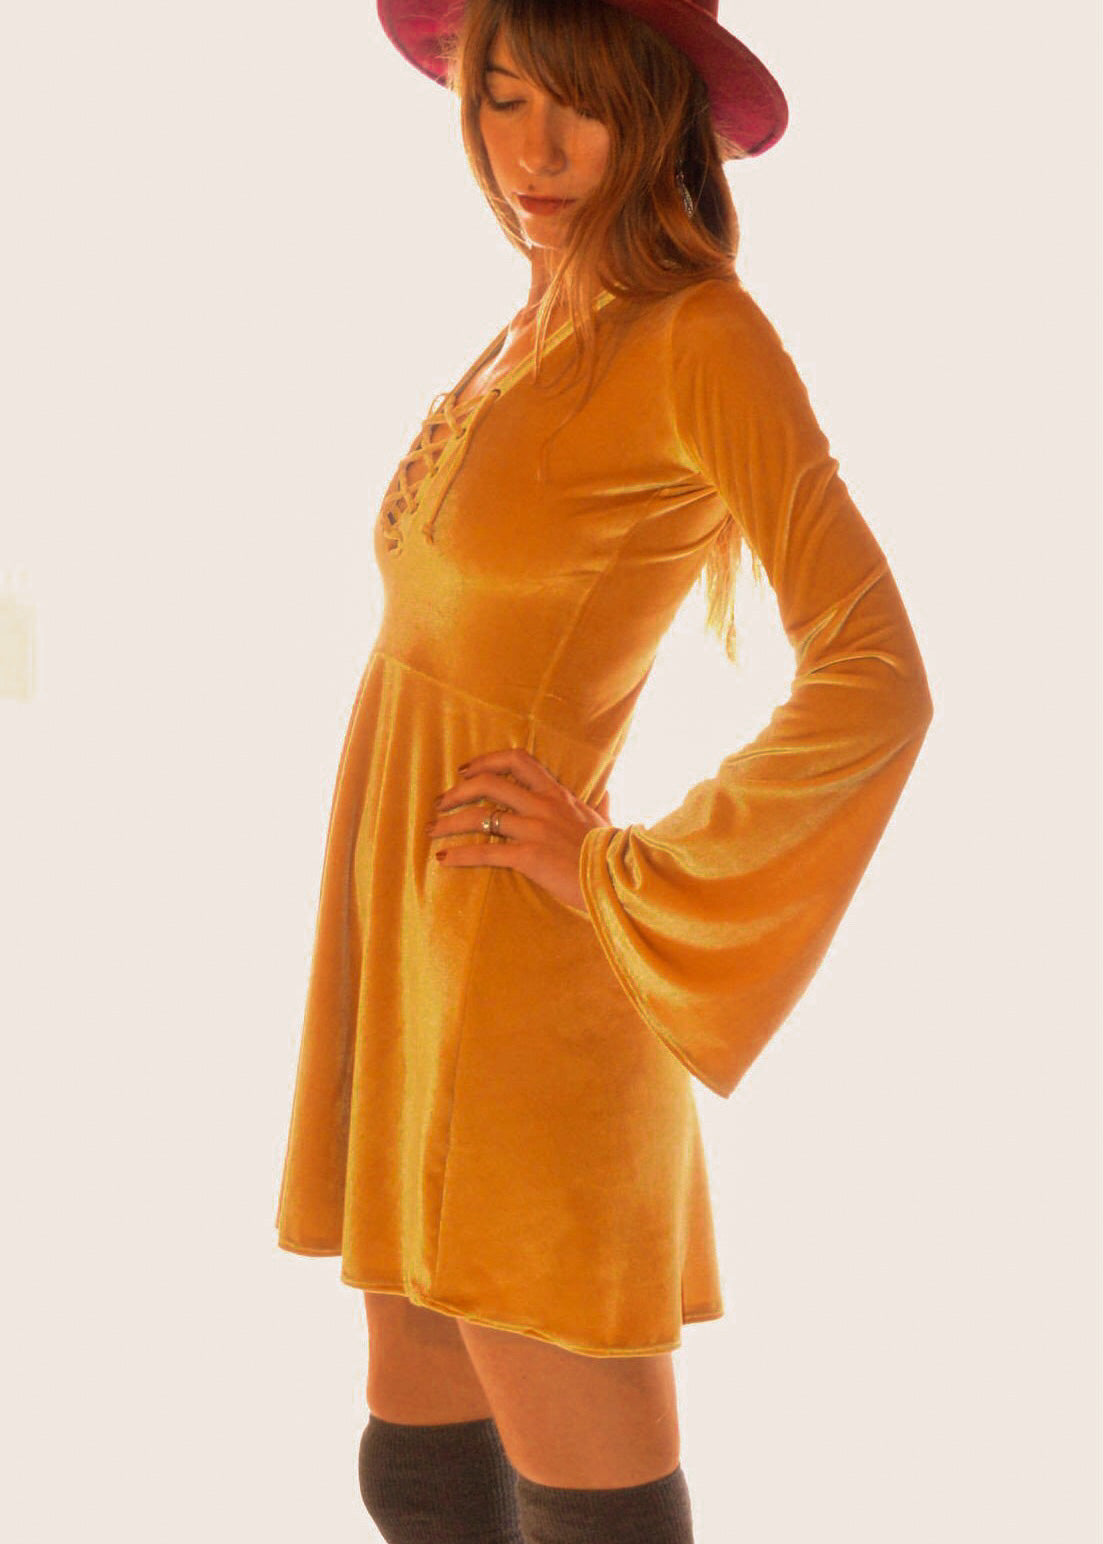 Velvet Lace up Dress with Bell Sleeves in Yellow Gold